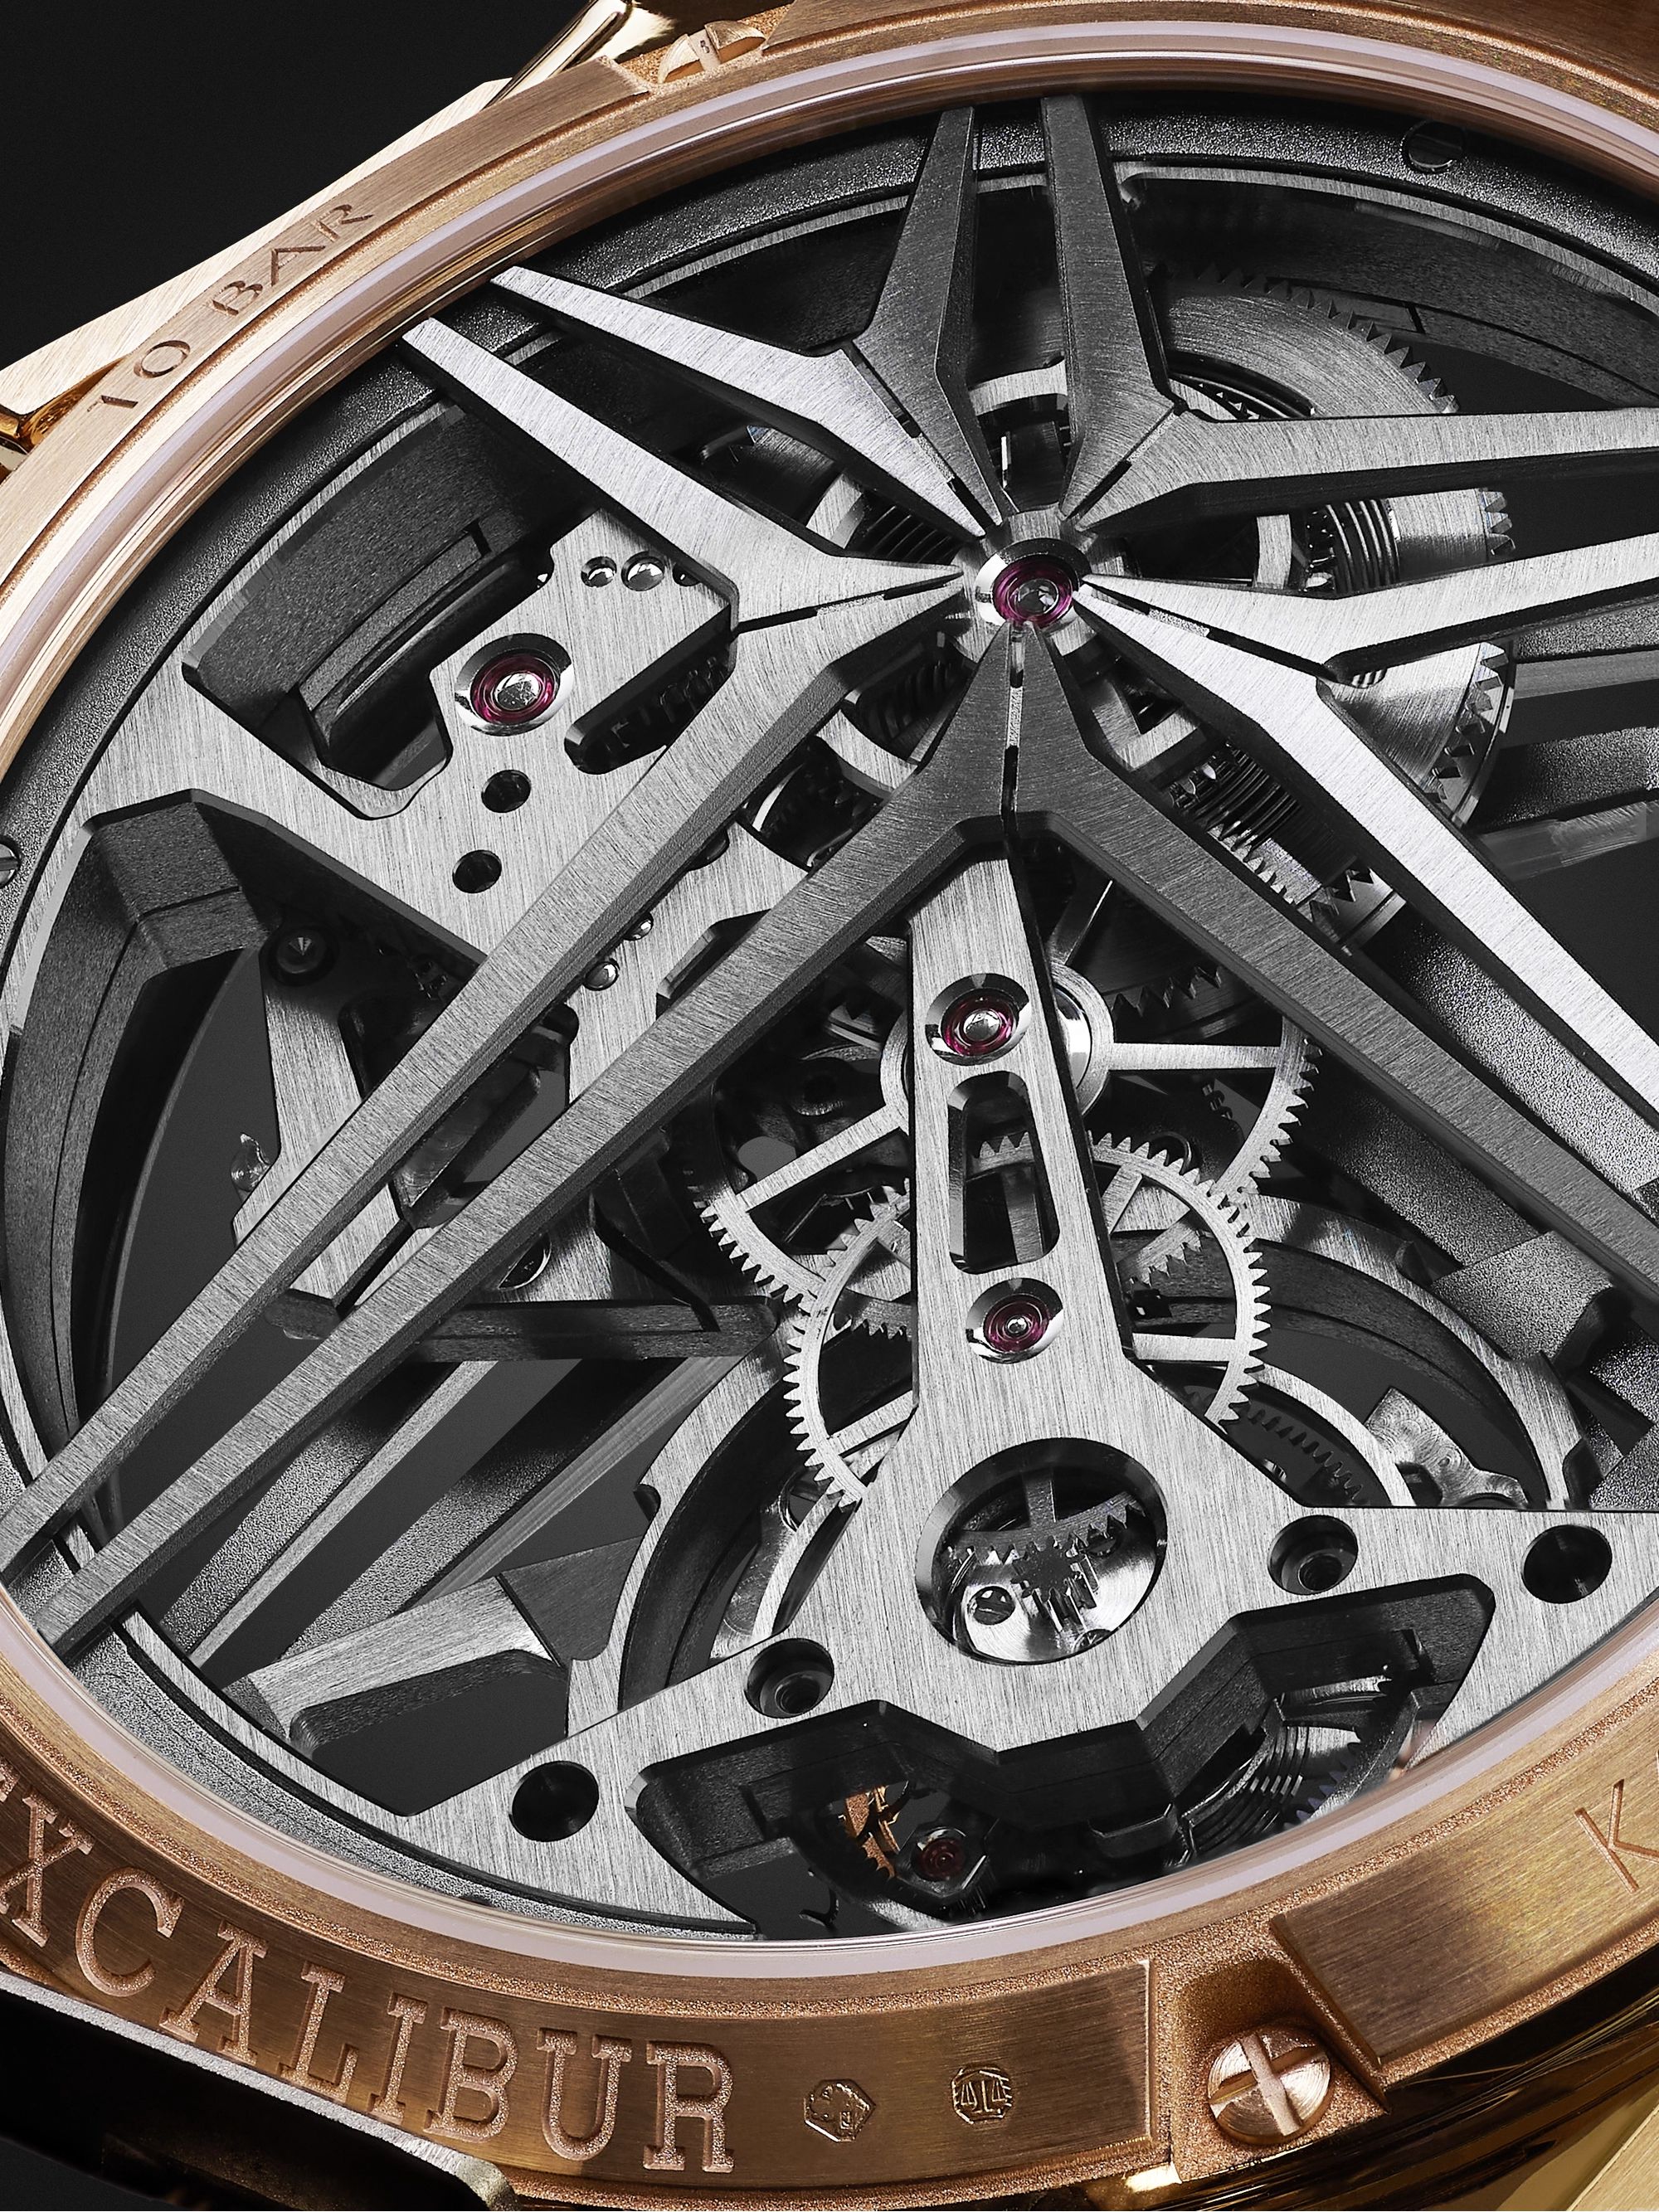 ROGER DUBUIS Excalibur EON Gold Limited Edition Automatic Skeleton Flying Tourbillon 42mm 18-Karat Pink Gold and Leather Watch, Ref. No. DBEX0836